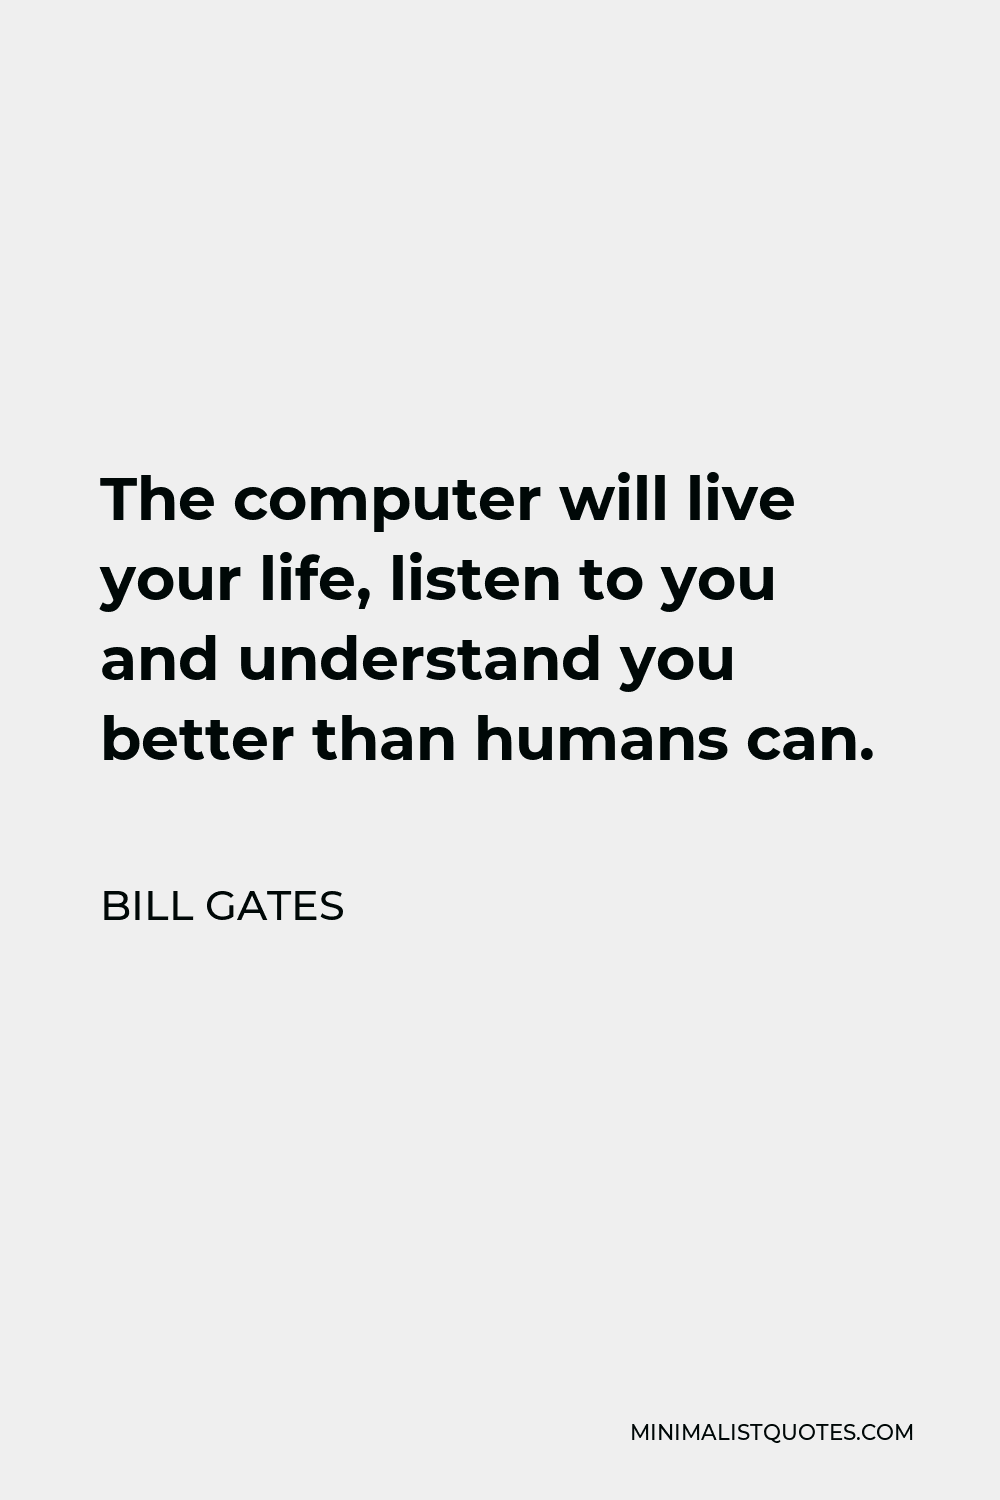 Bill Gates Quote - The computer will live your life, listen to you and understand you better than humans can.